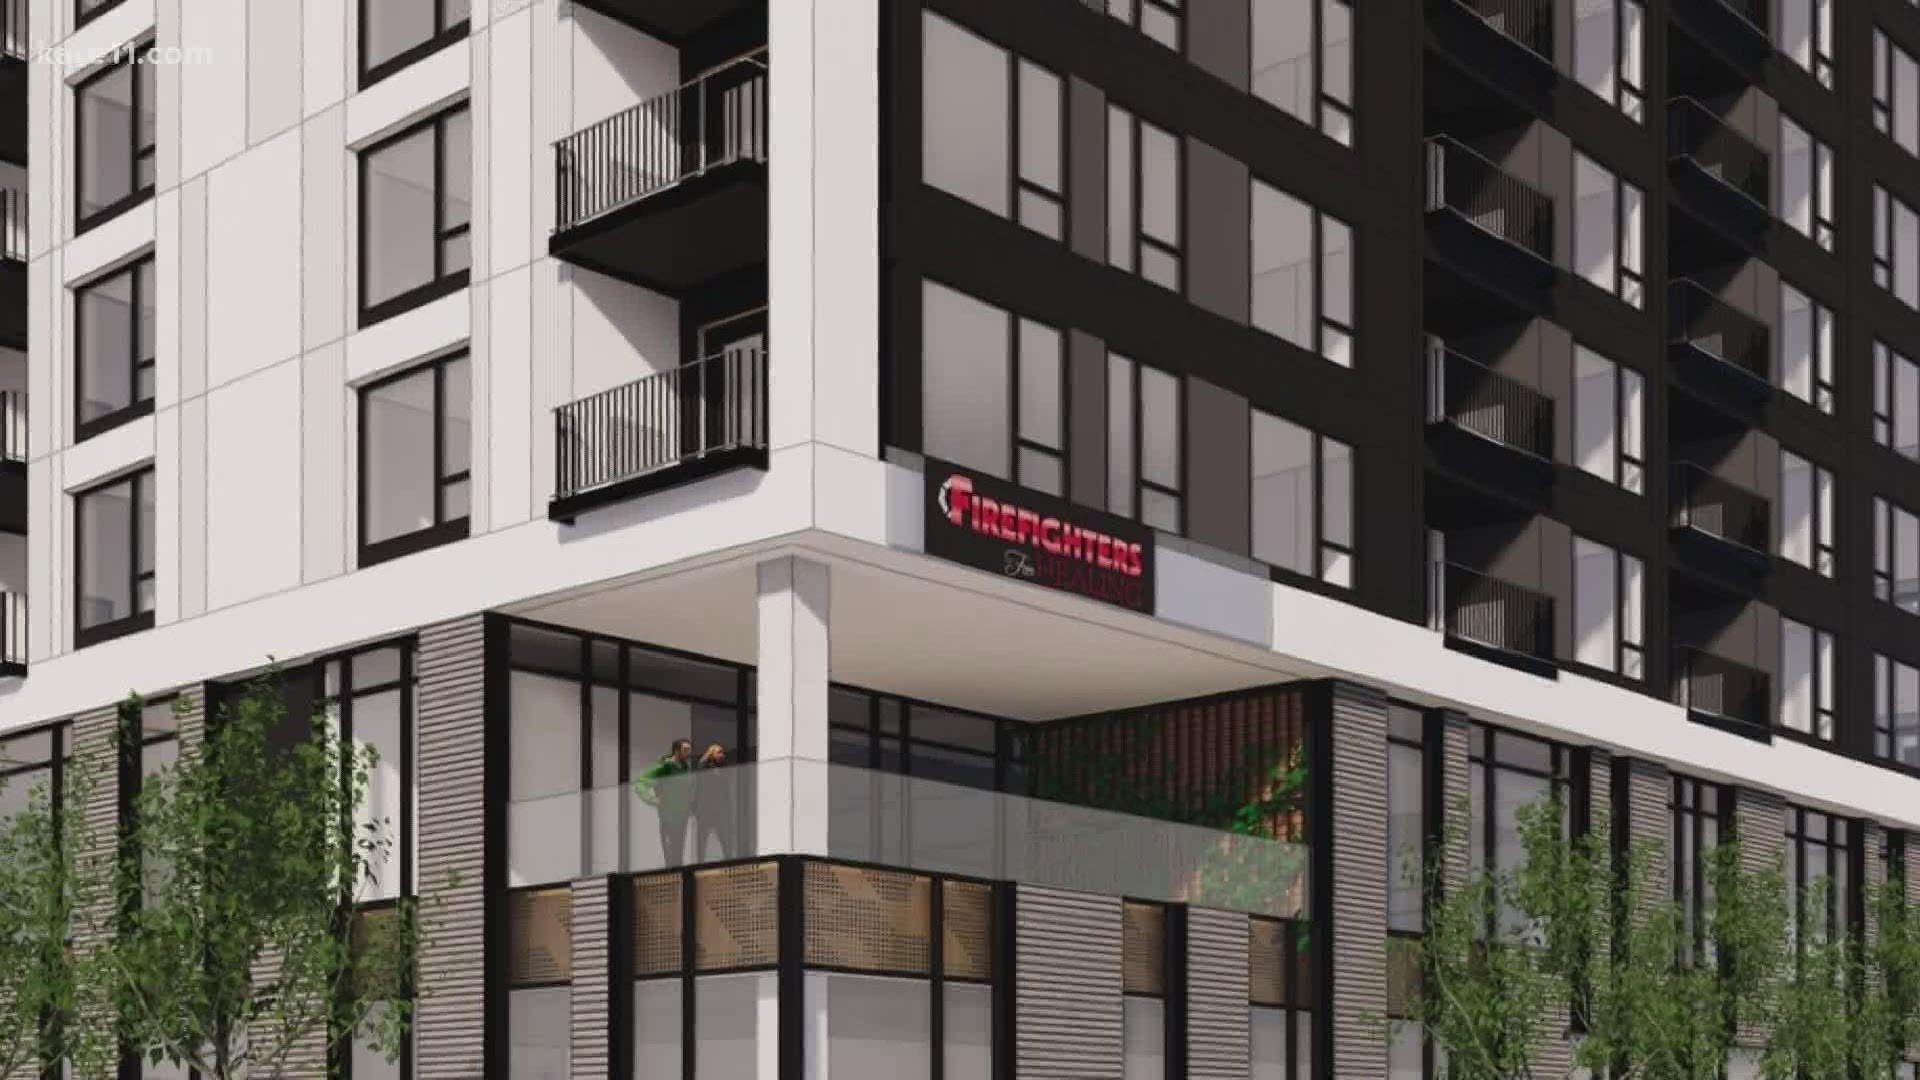 The non-profit is building a Transitional Healing Center in the heart of downtown Minneapolis, just a few block away from HCMC's burn center.